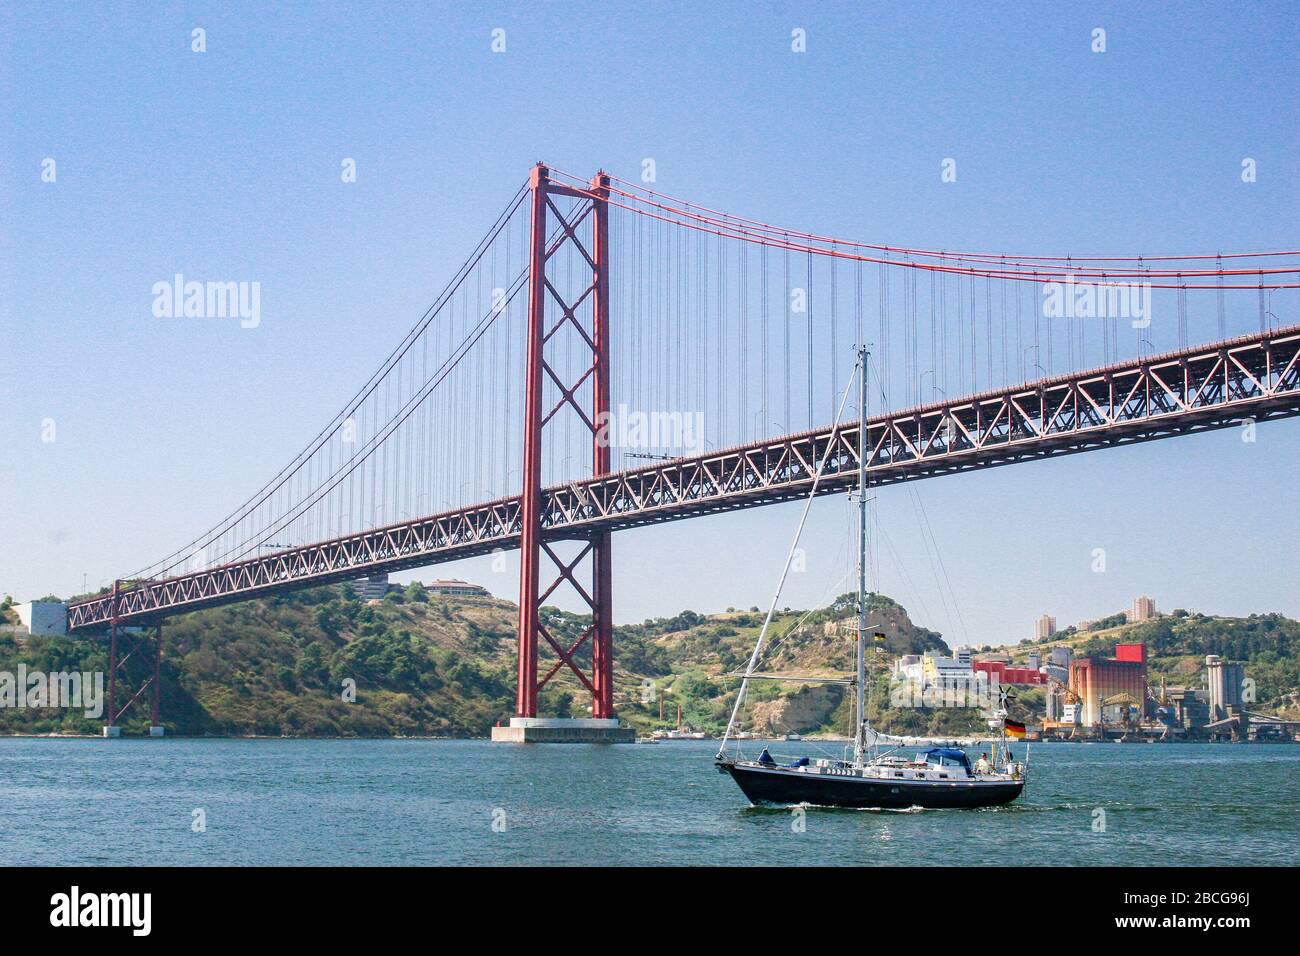 sailing yacht passing the Bridge of the 25 th of April, over the river Tejo in Lisbon, Portugal Stock Photo